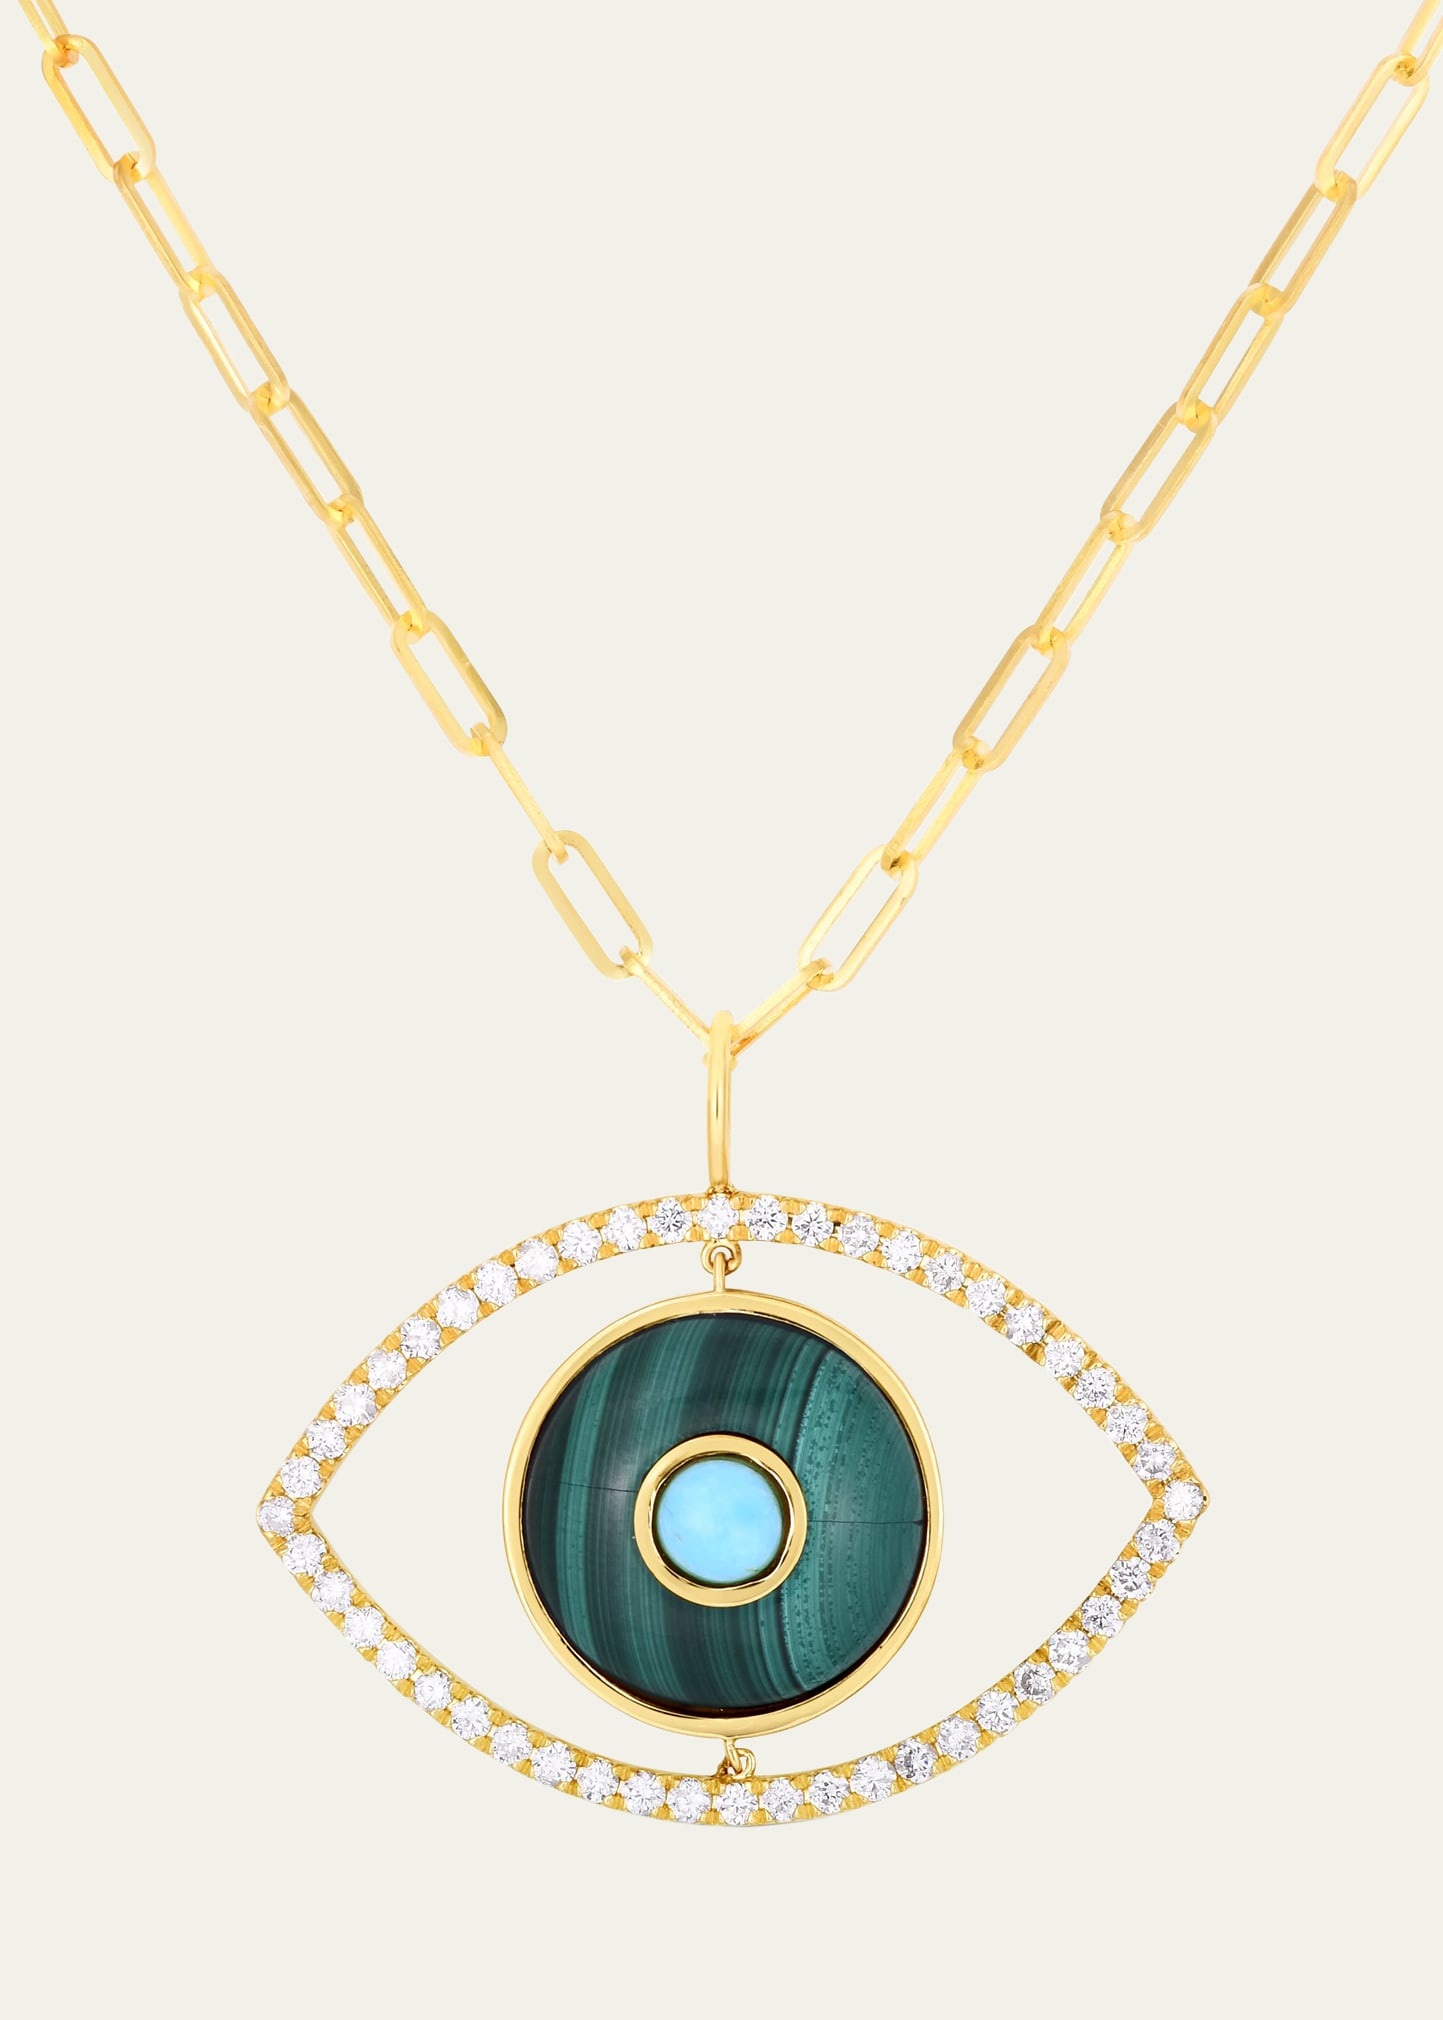 Audrey C. Jewels Diamond And Gemstone Evil Eye Pendant Necklace In Gold